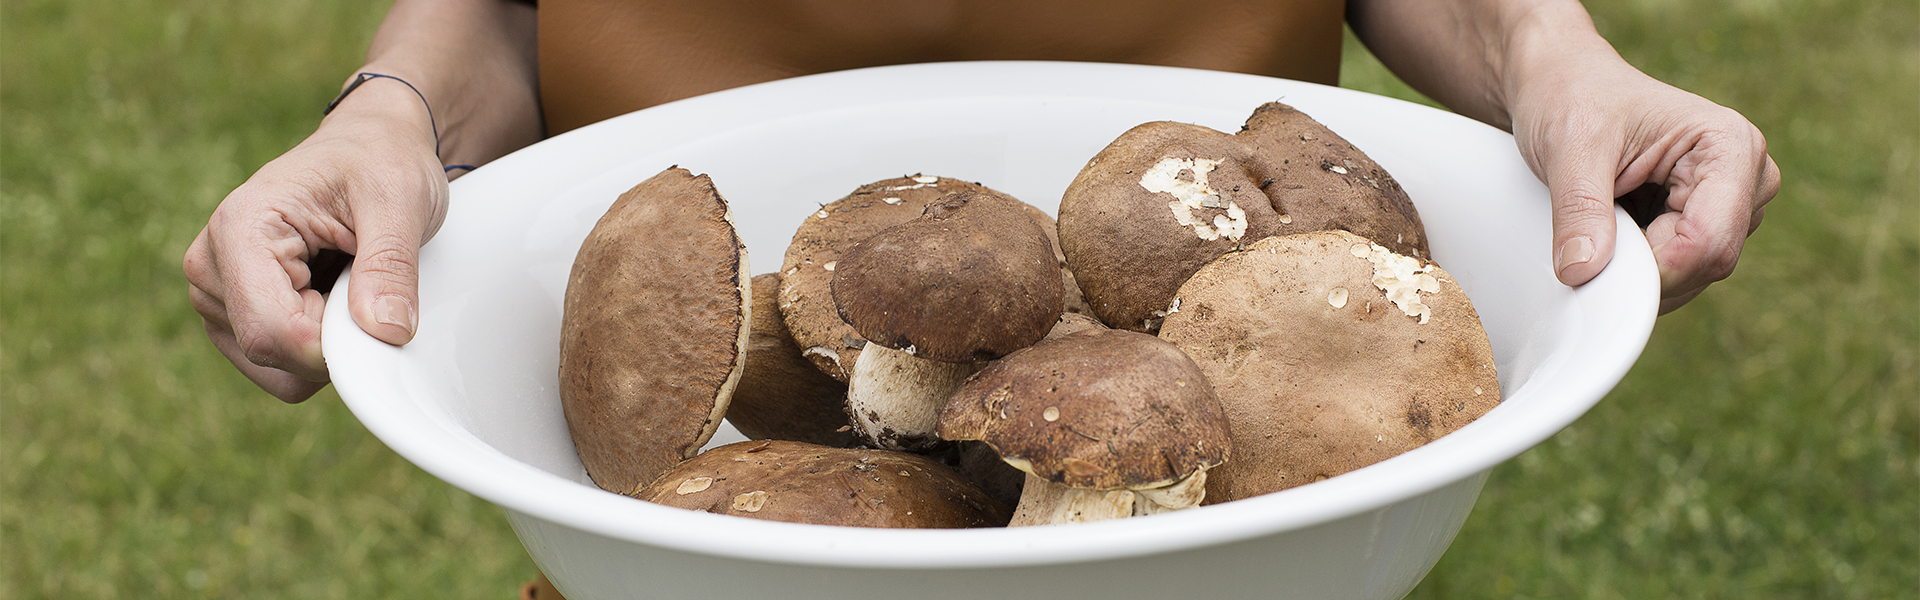 How to use and take care of mushrooms